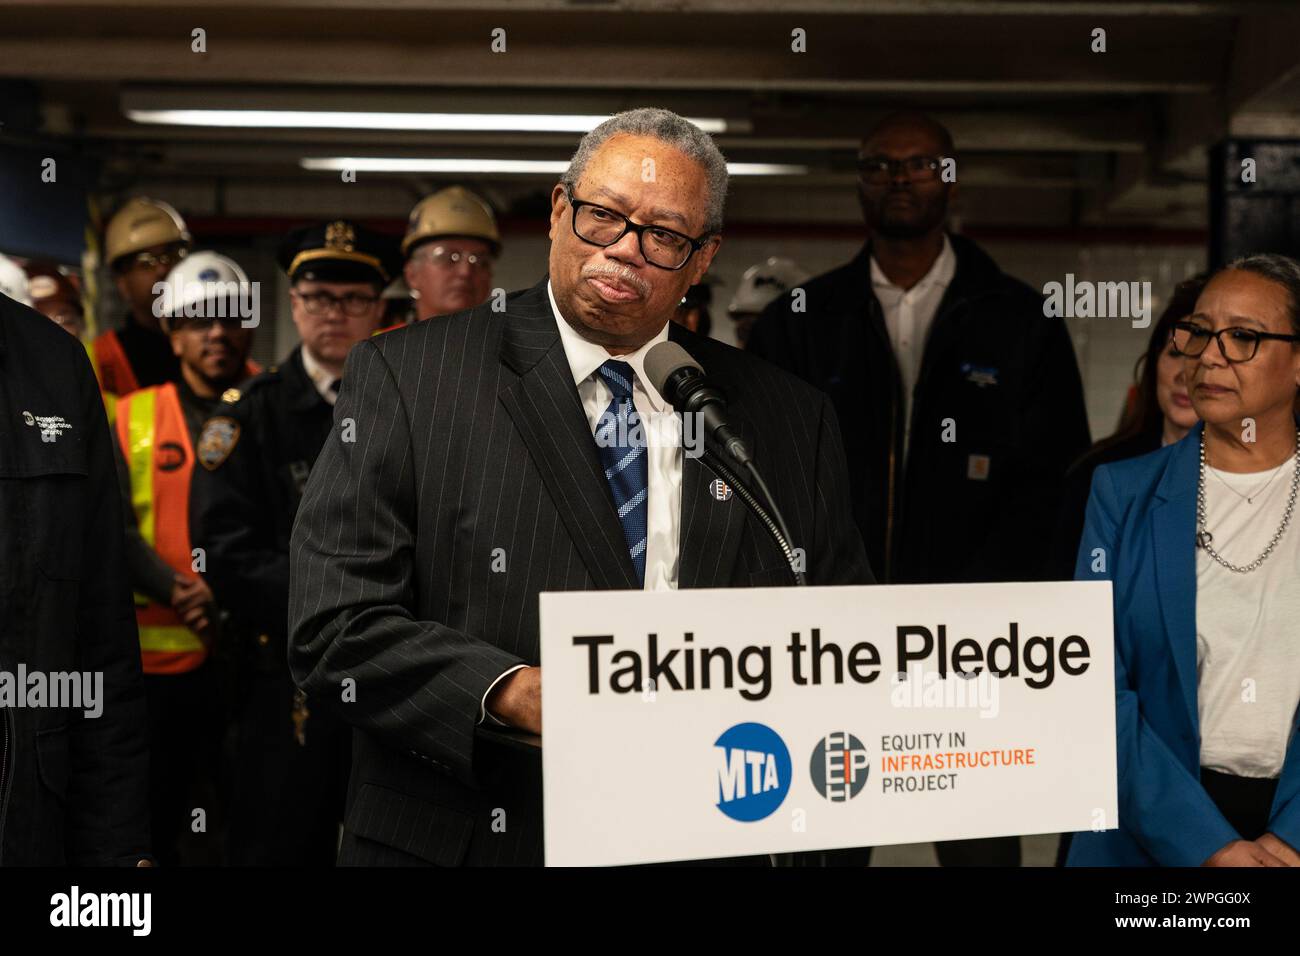 Dorval Carter Jr., Chicago Transit Authority President and Equity in Infrastructure Project Co-Chair speaks during MTA announcement at 14th street subway station in New York on March 7, 2024. Dorval Carter Jr., Chicago Transit Authority President and Equity in Infrastructure Project Co-Chair, John Porcari, Equity in Infrastructure Project Co-Founder and Former U.S. Deputy Secretary of Transportation, Phillip Washington, Denver International Airport CEO and Equity in Infrastructure Project Chair, Janno Lieber, MTA Chair and CEO signed a pledge to promote minorities and women owned business to r Stock Photo